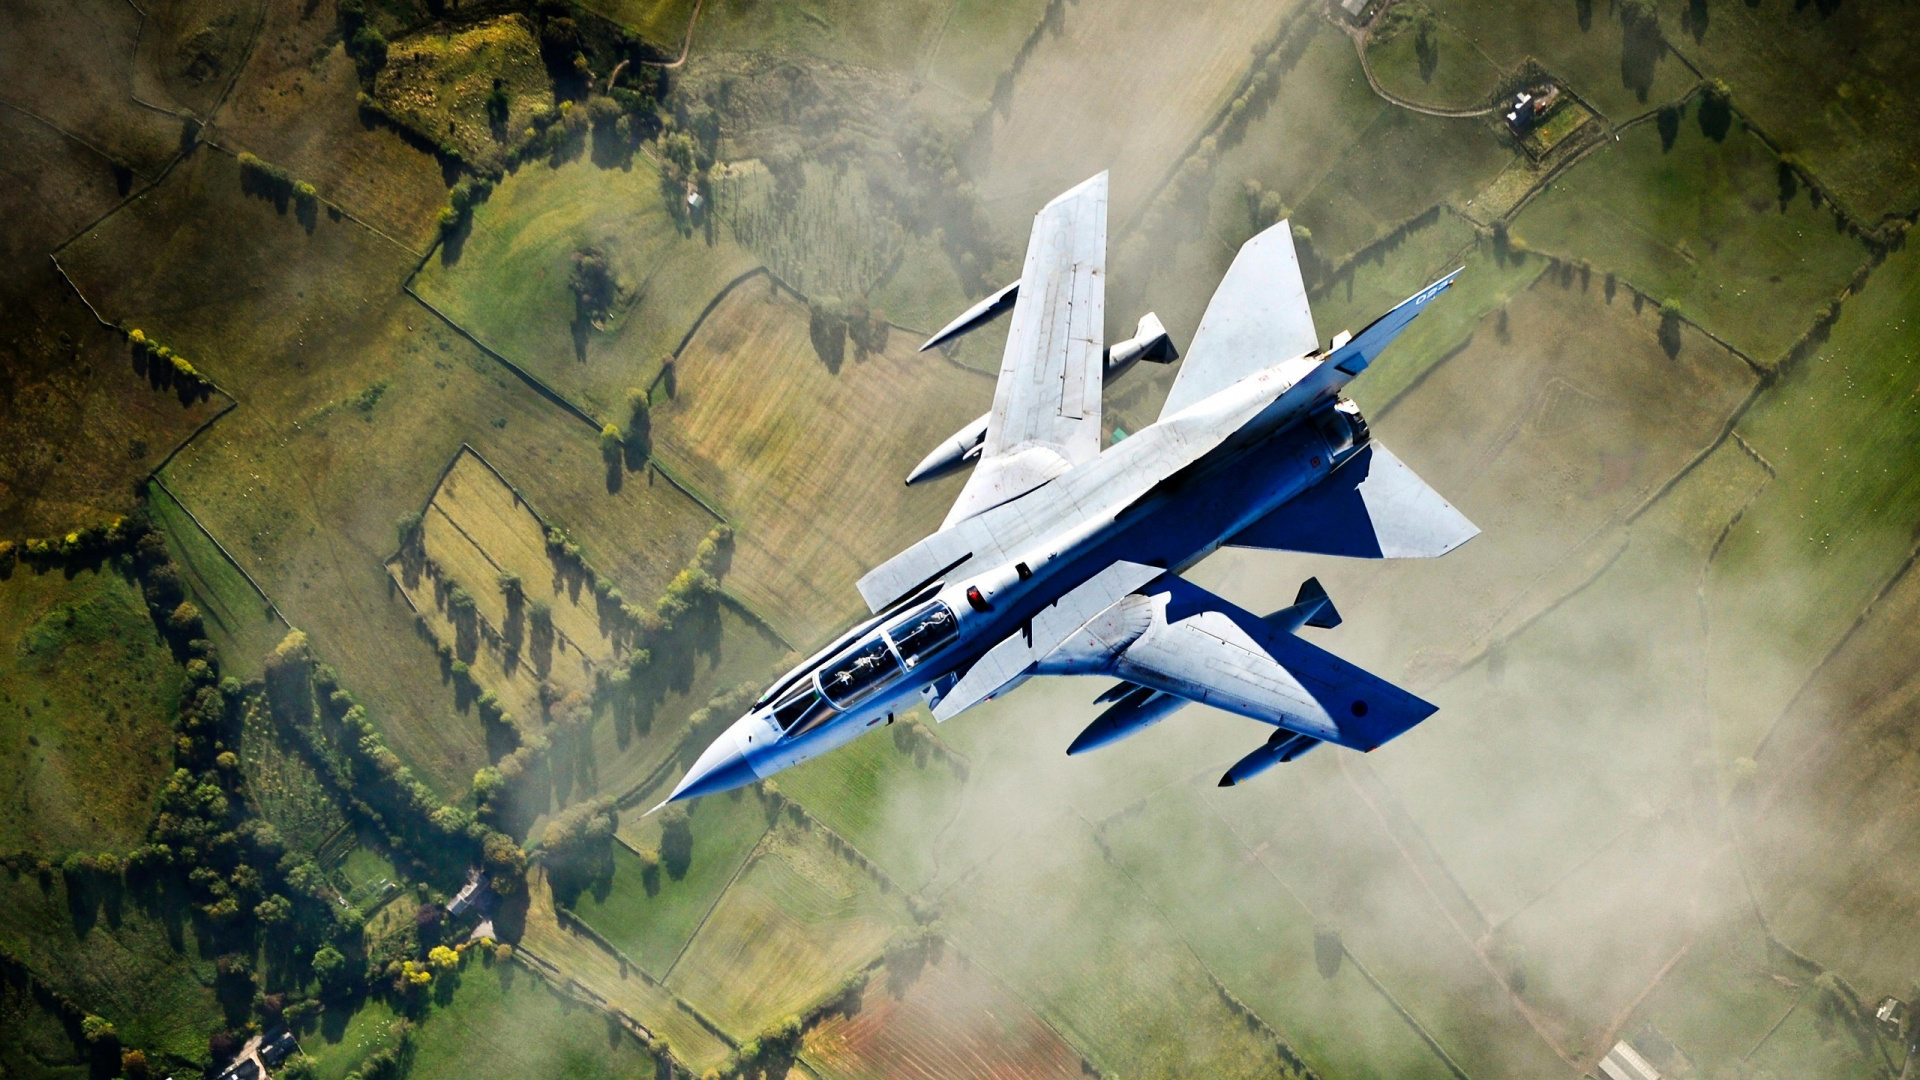 White and Blue Jet Plane Flying Over Green Grass Field During Daytime. Wallpaper in 1920x1080 Resolution